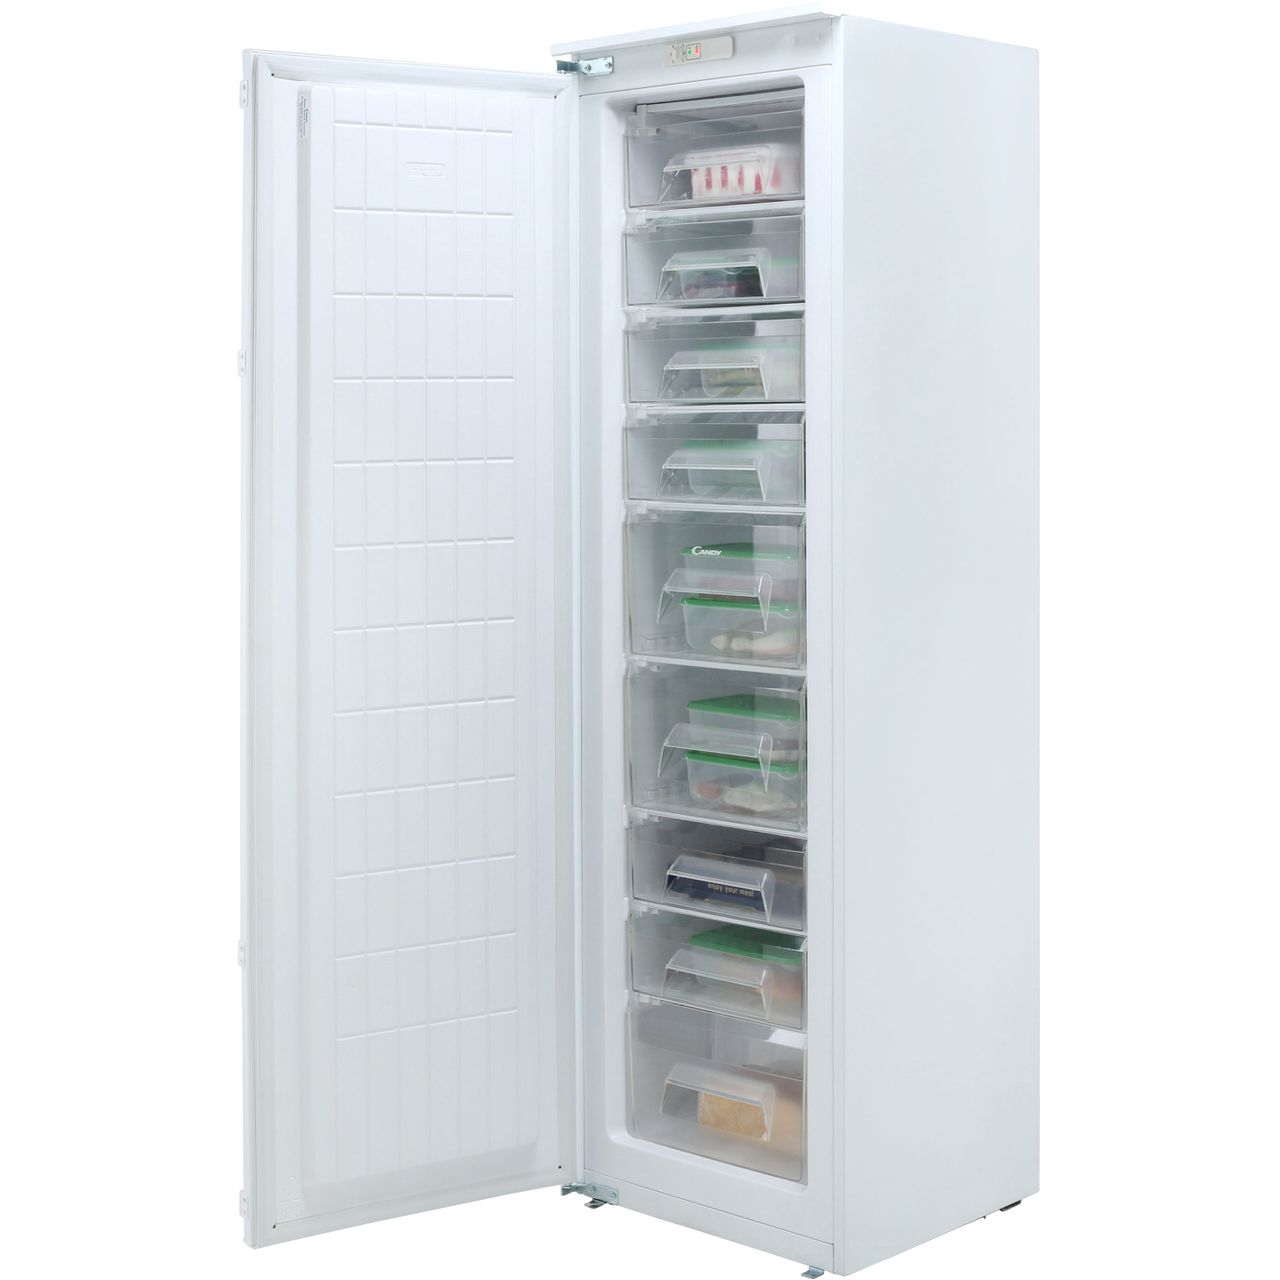 Candy CFFO3550E/1K Integrated Upright Freezer with Sliding Door Fixing Kit Review